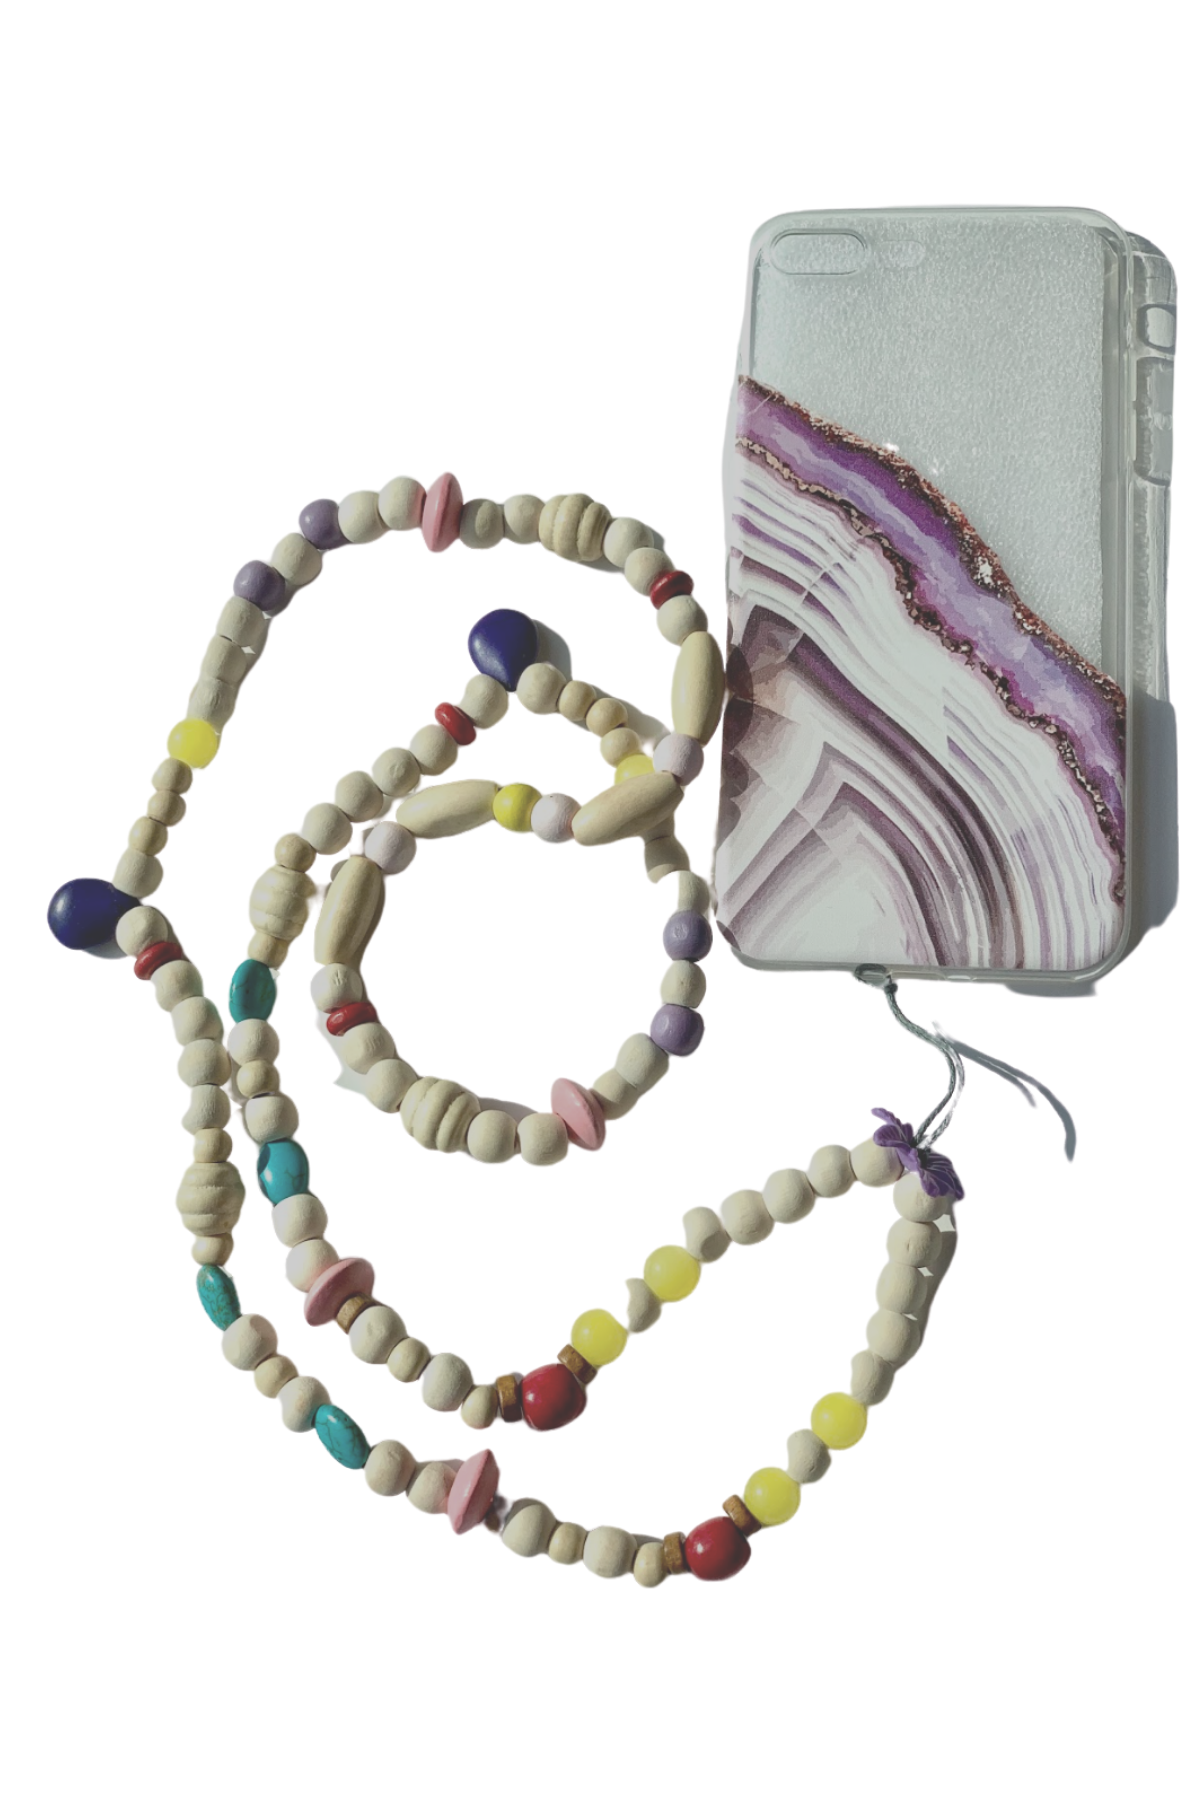 Marble Phone Necklace with iPhone Case